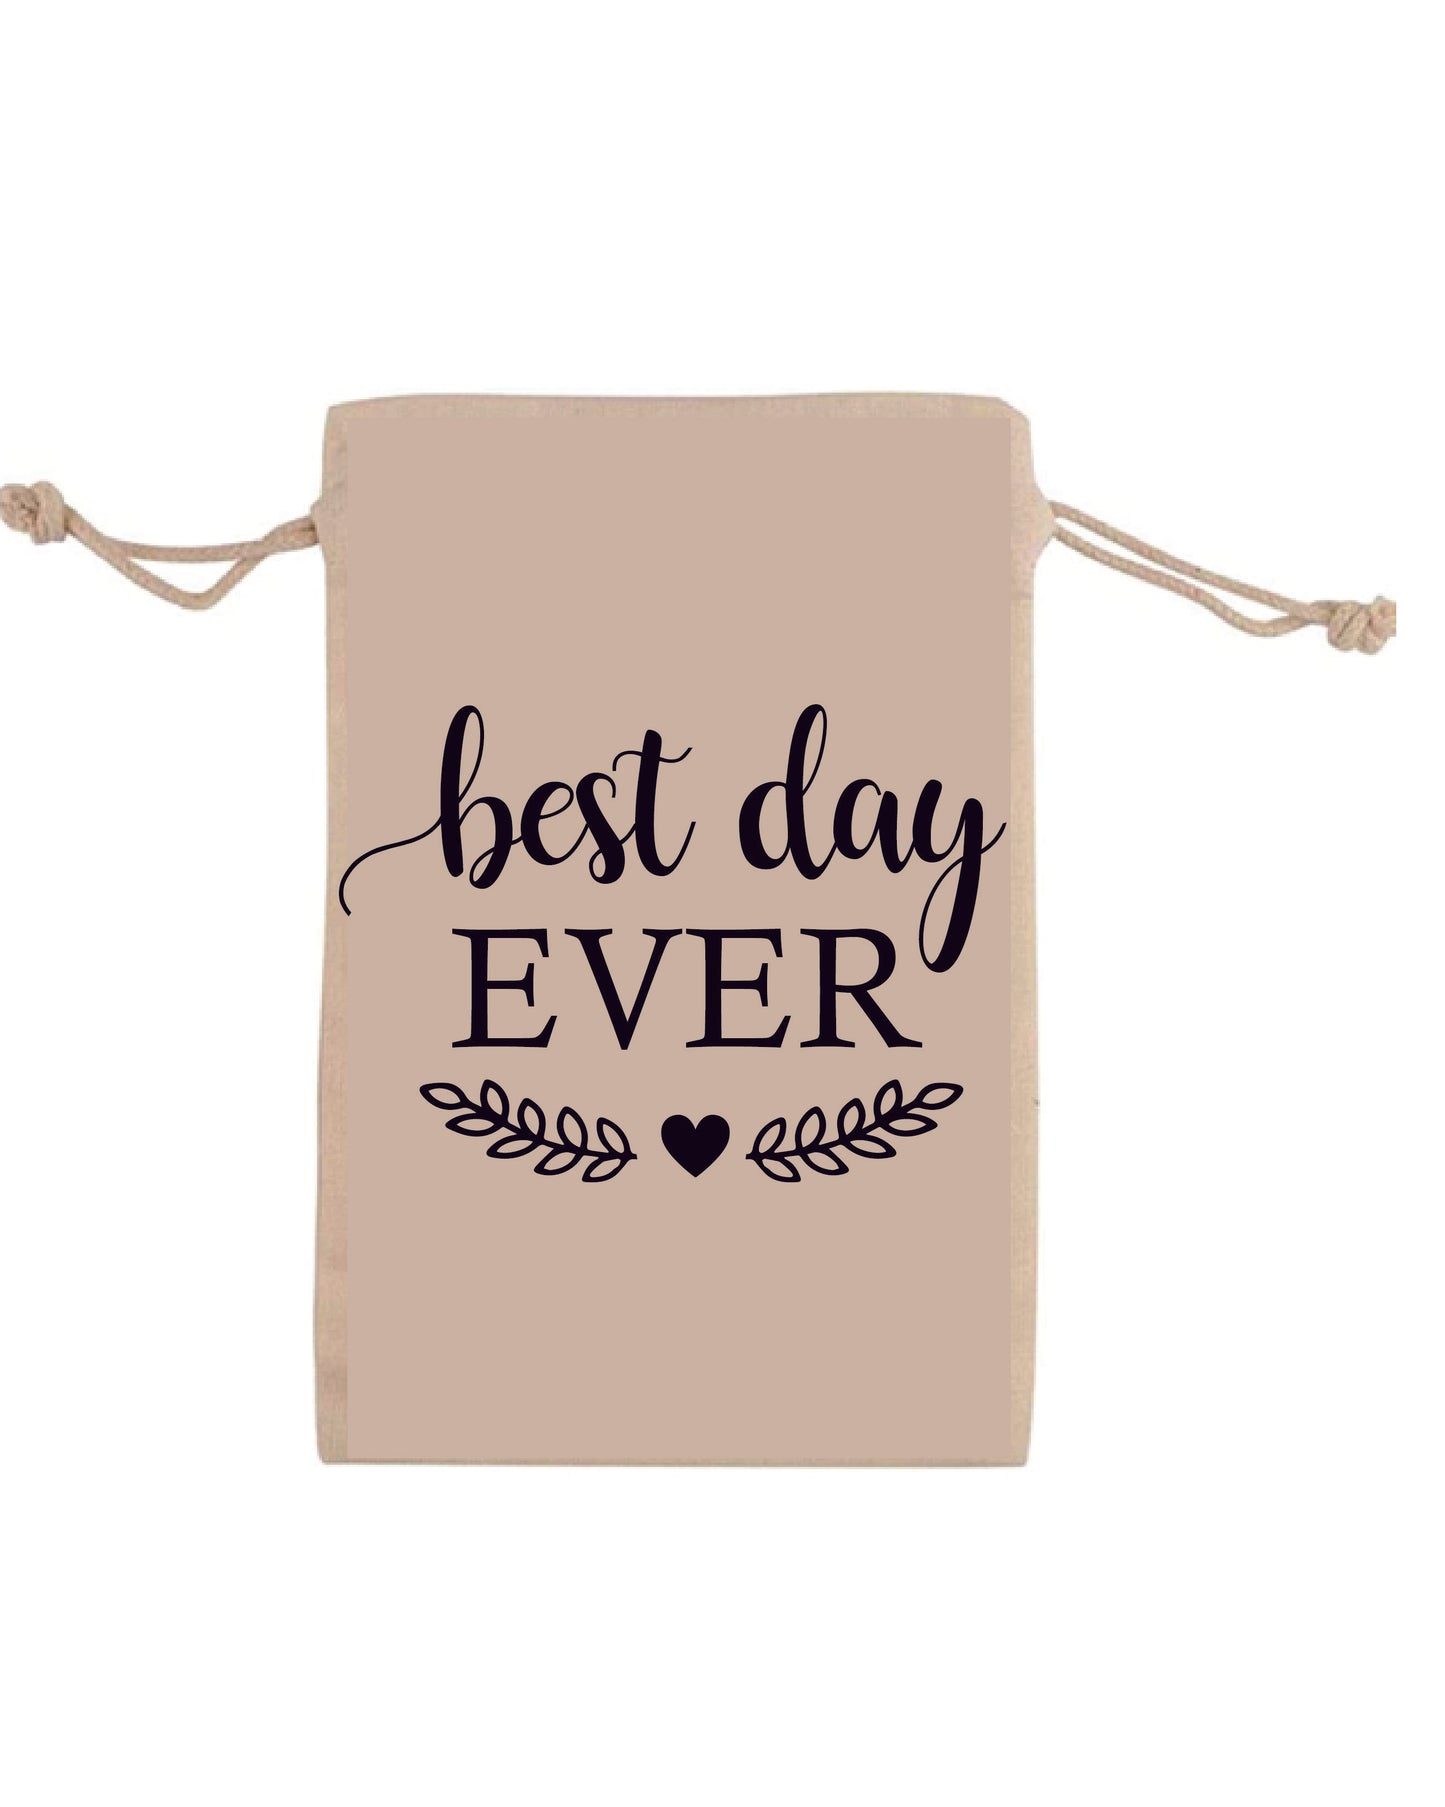 Best day ever- set of 10 canvas thank you bags